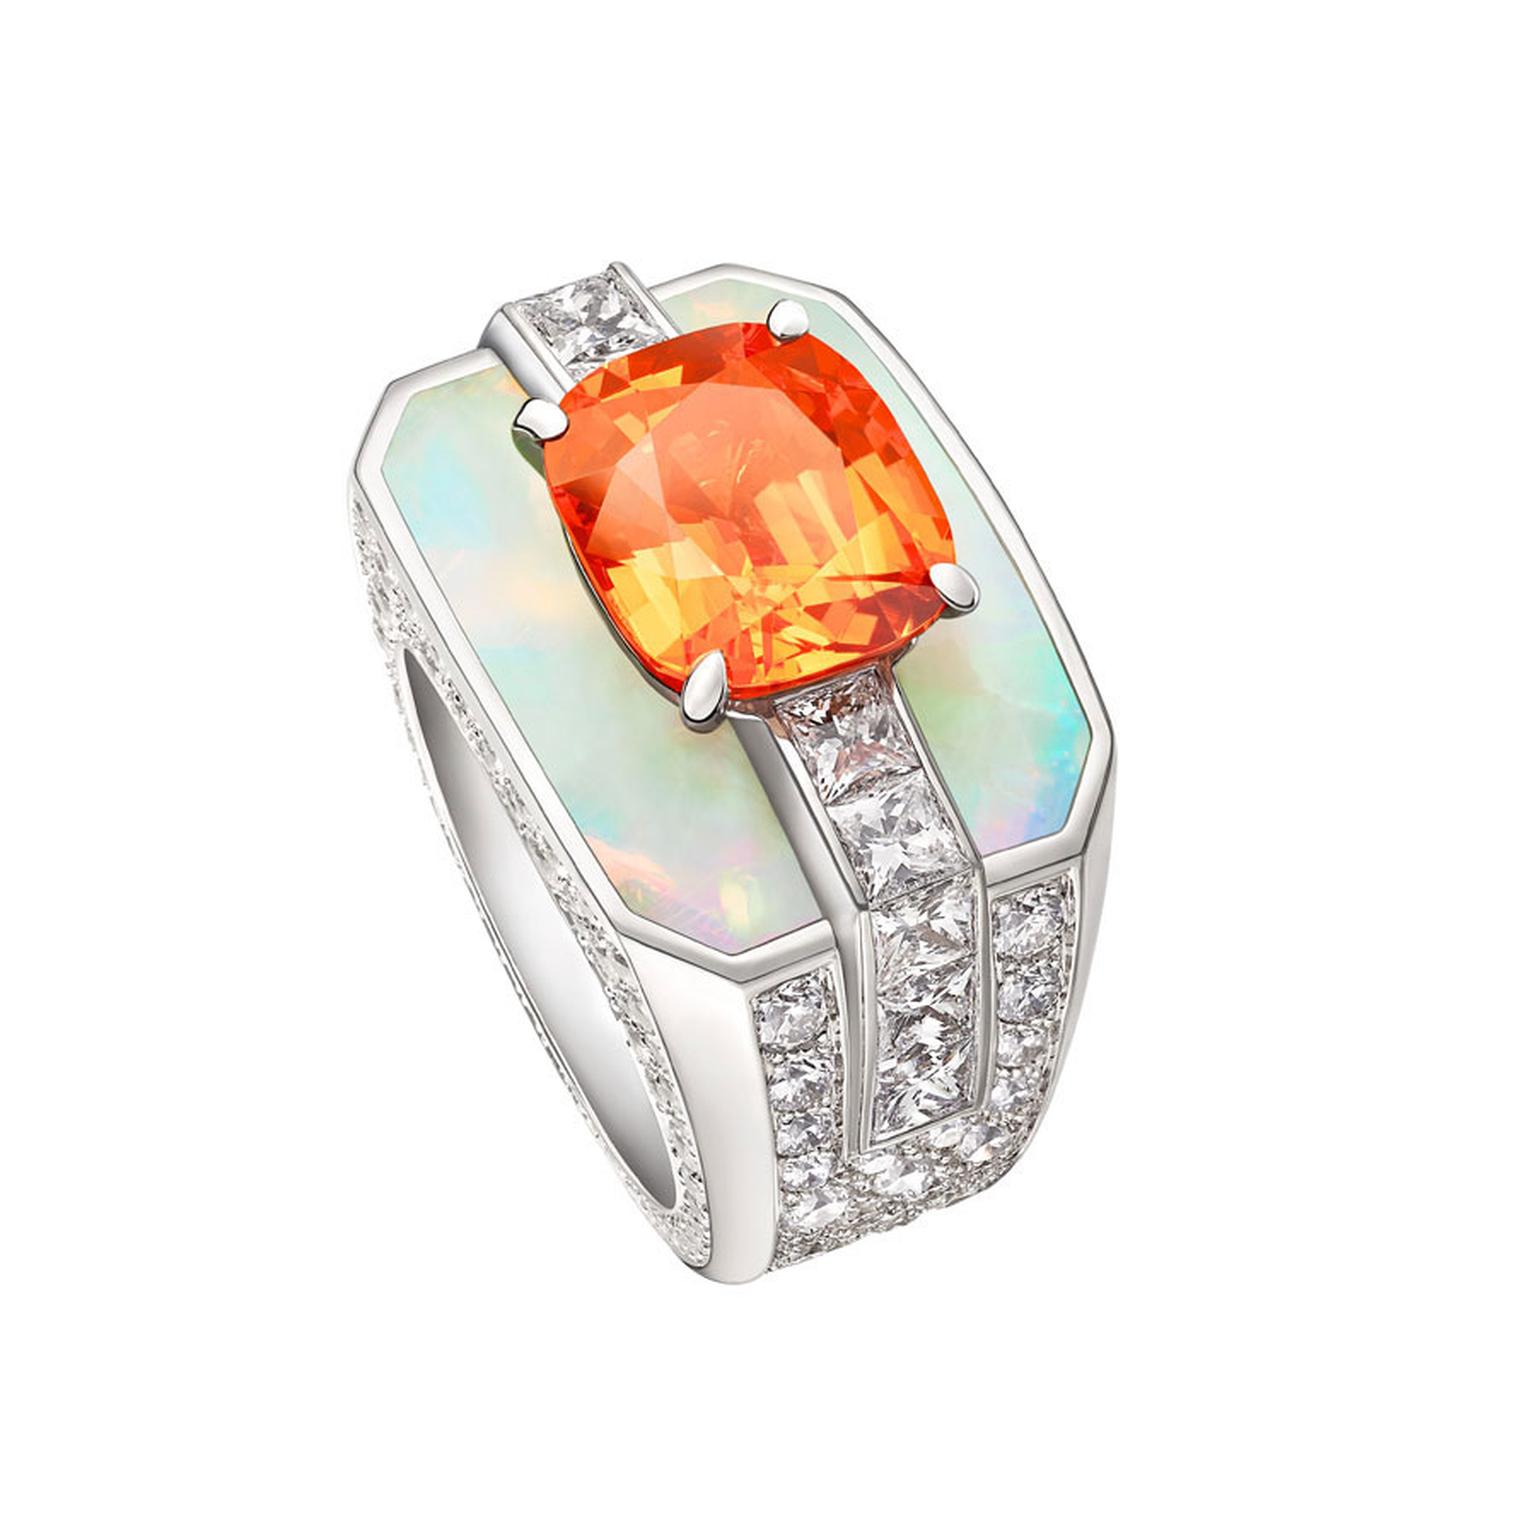 Louis Vuitton Chain Attraction opal ring